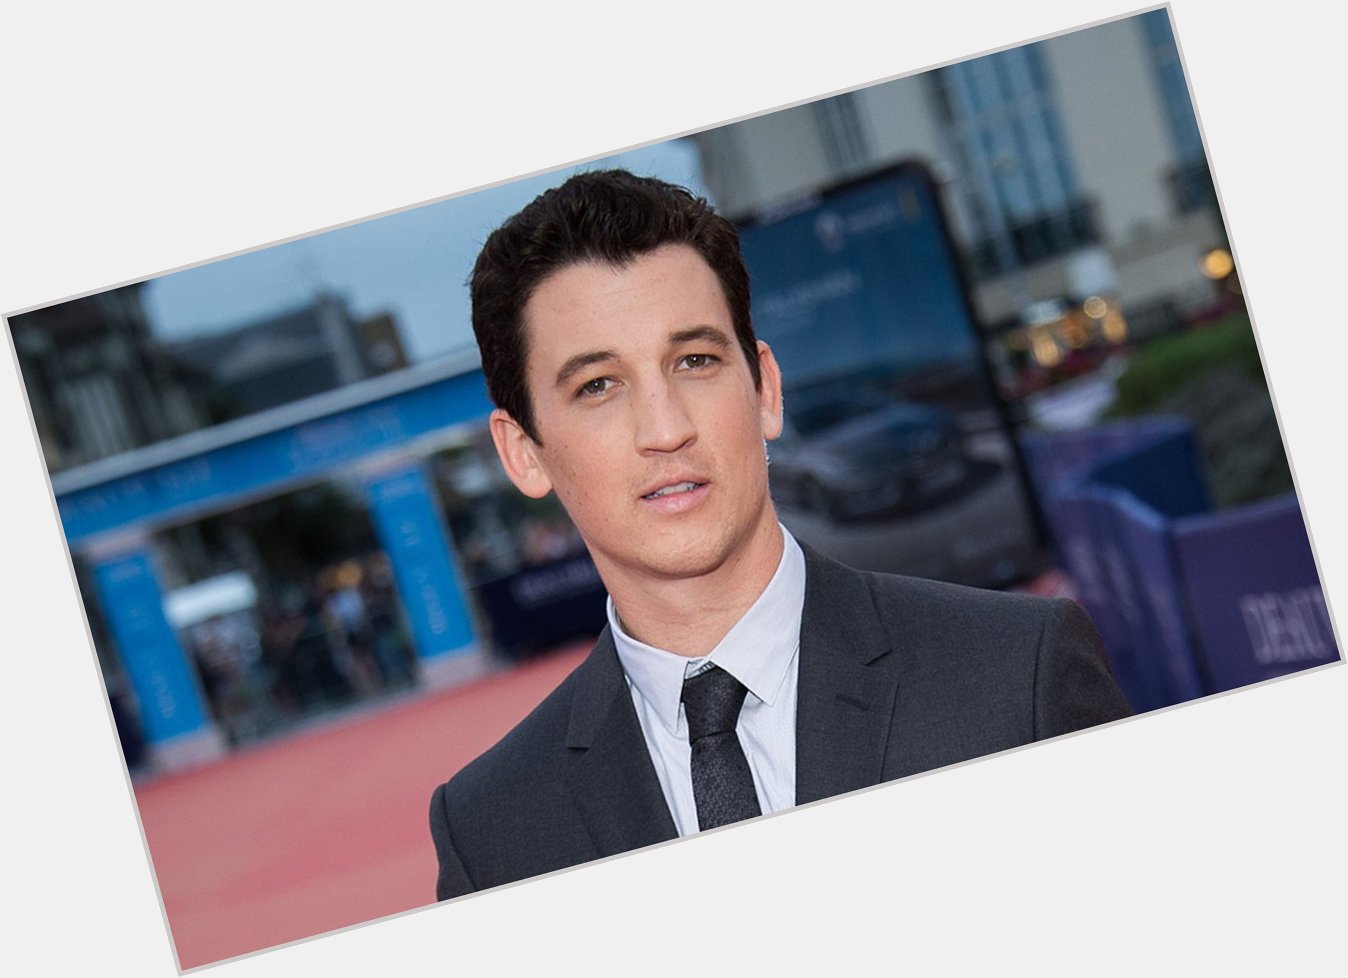 Happy birthday to the talented actor of Whiplash and the Divergent Series, Miles Teller! 